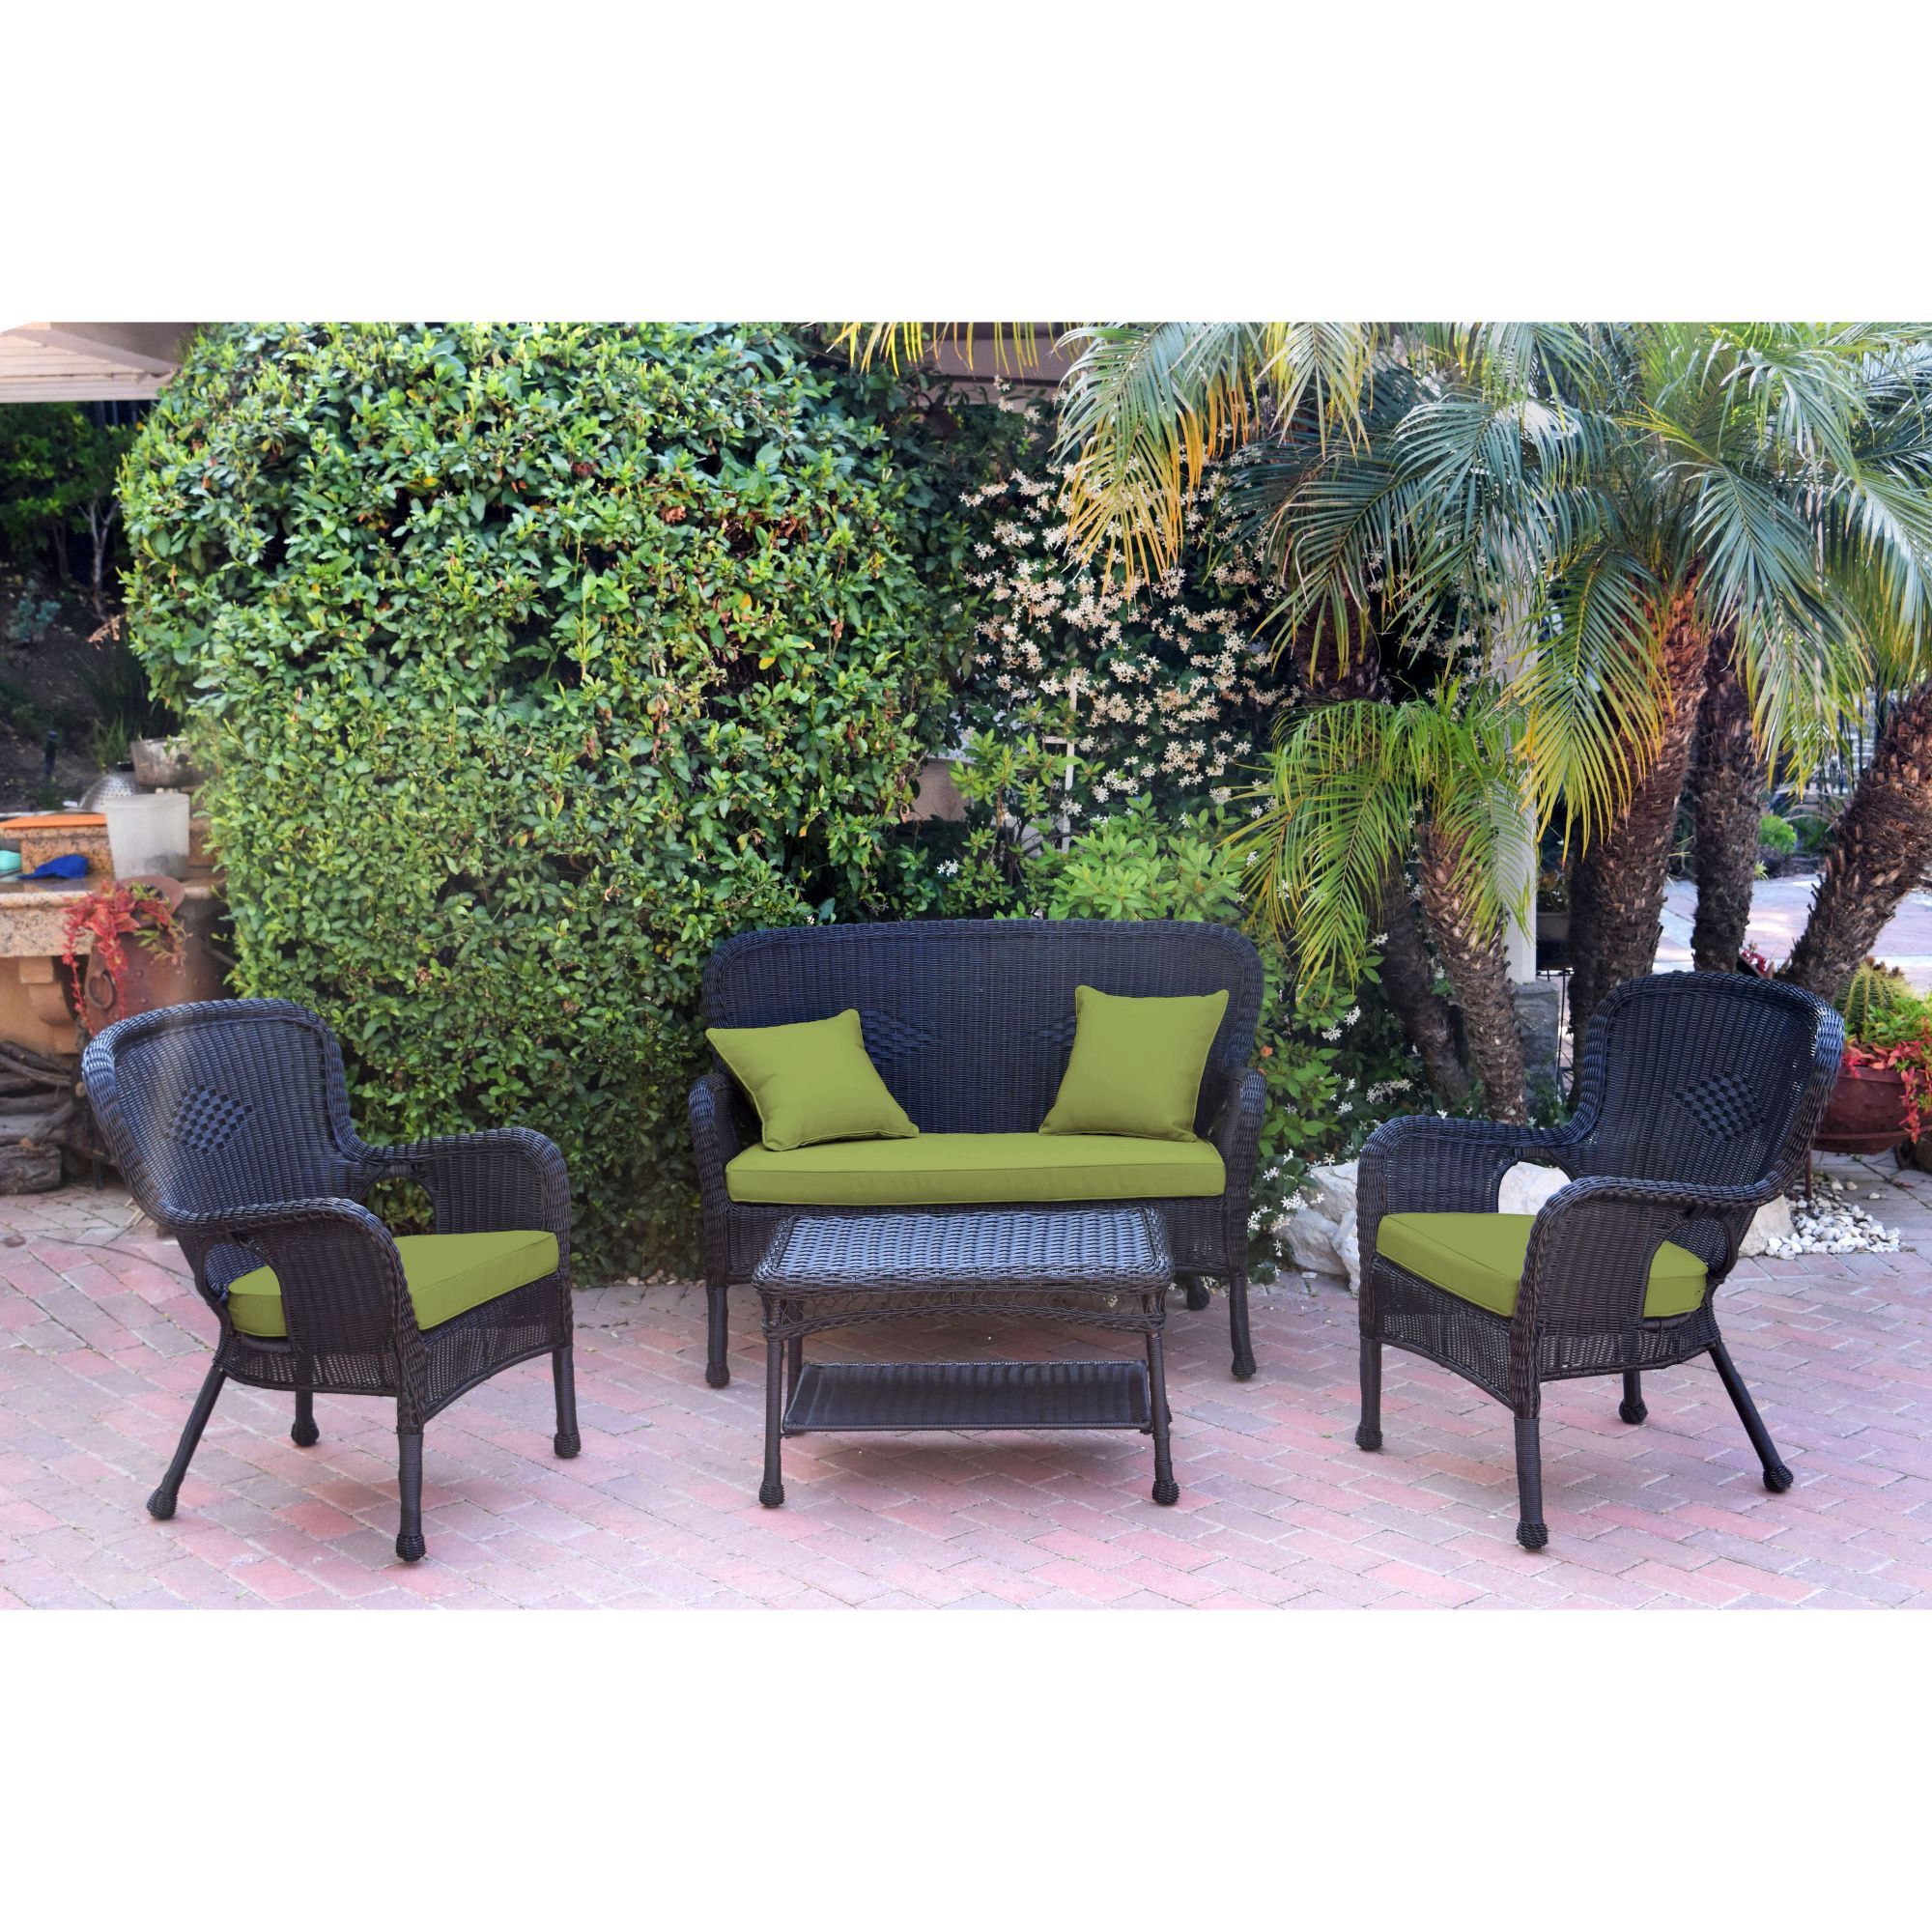 4 Piece Black Solid Wicker Outdoor Furniture Patio Conversation Set Pertaining To Most Up To Date Black Cushion Patio Conversation Sets (View 10 of 15)